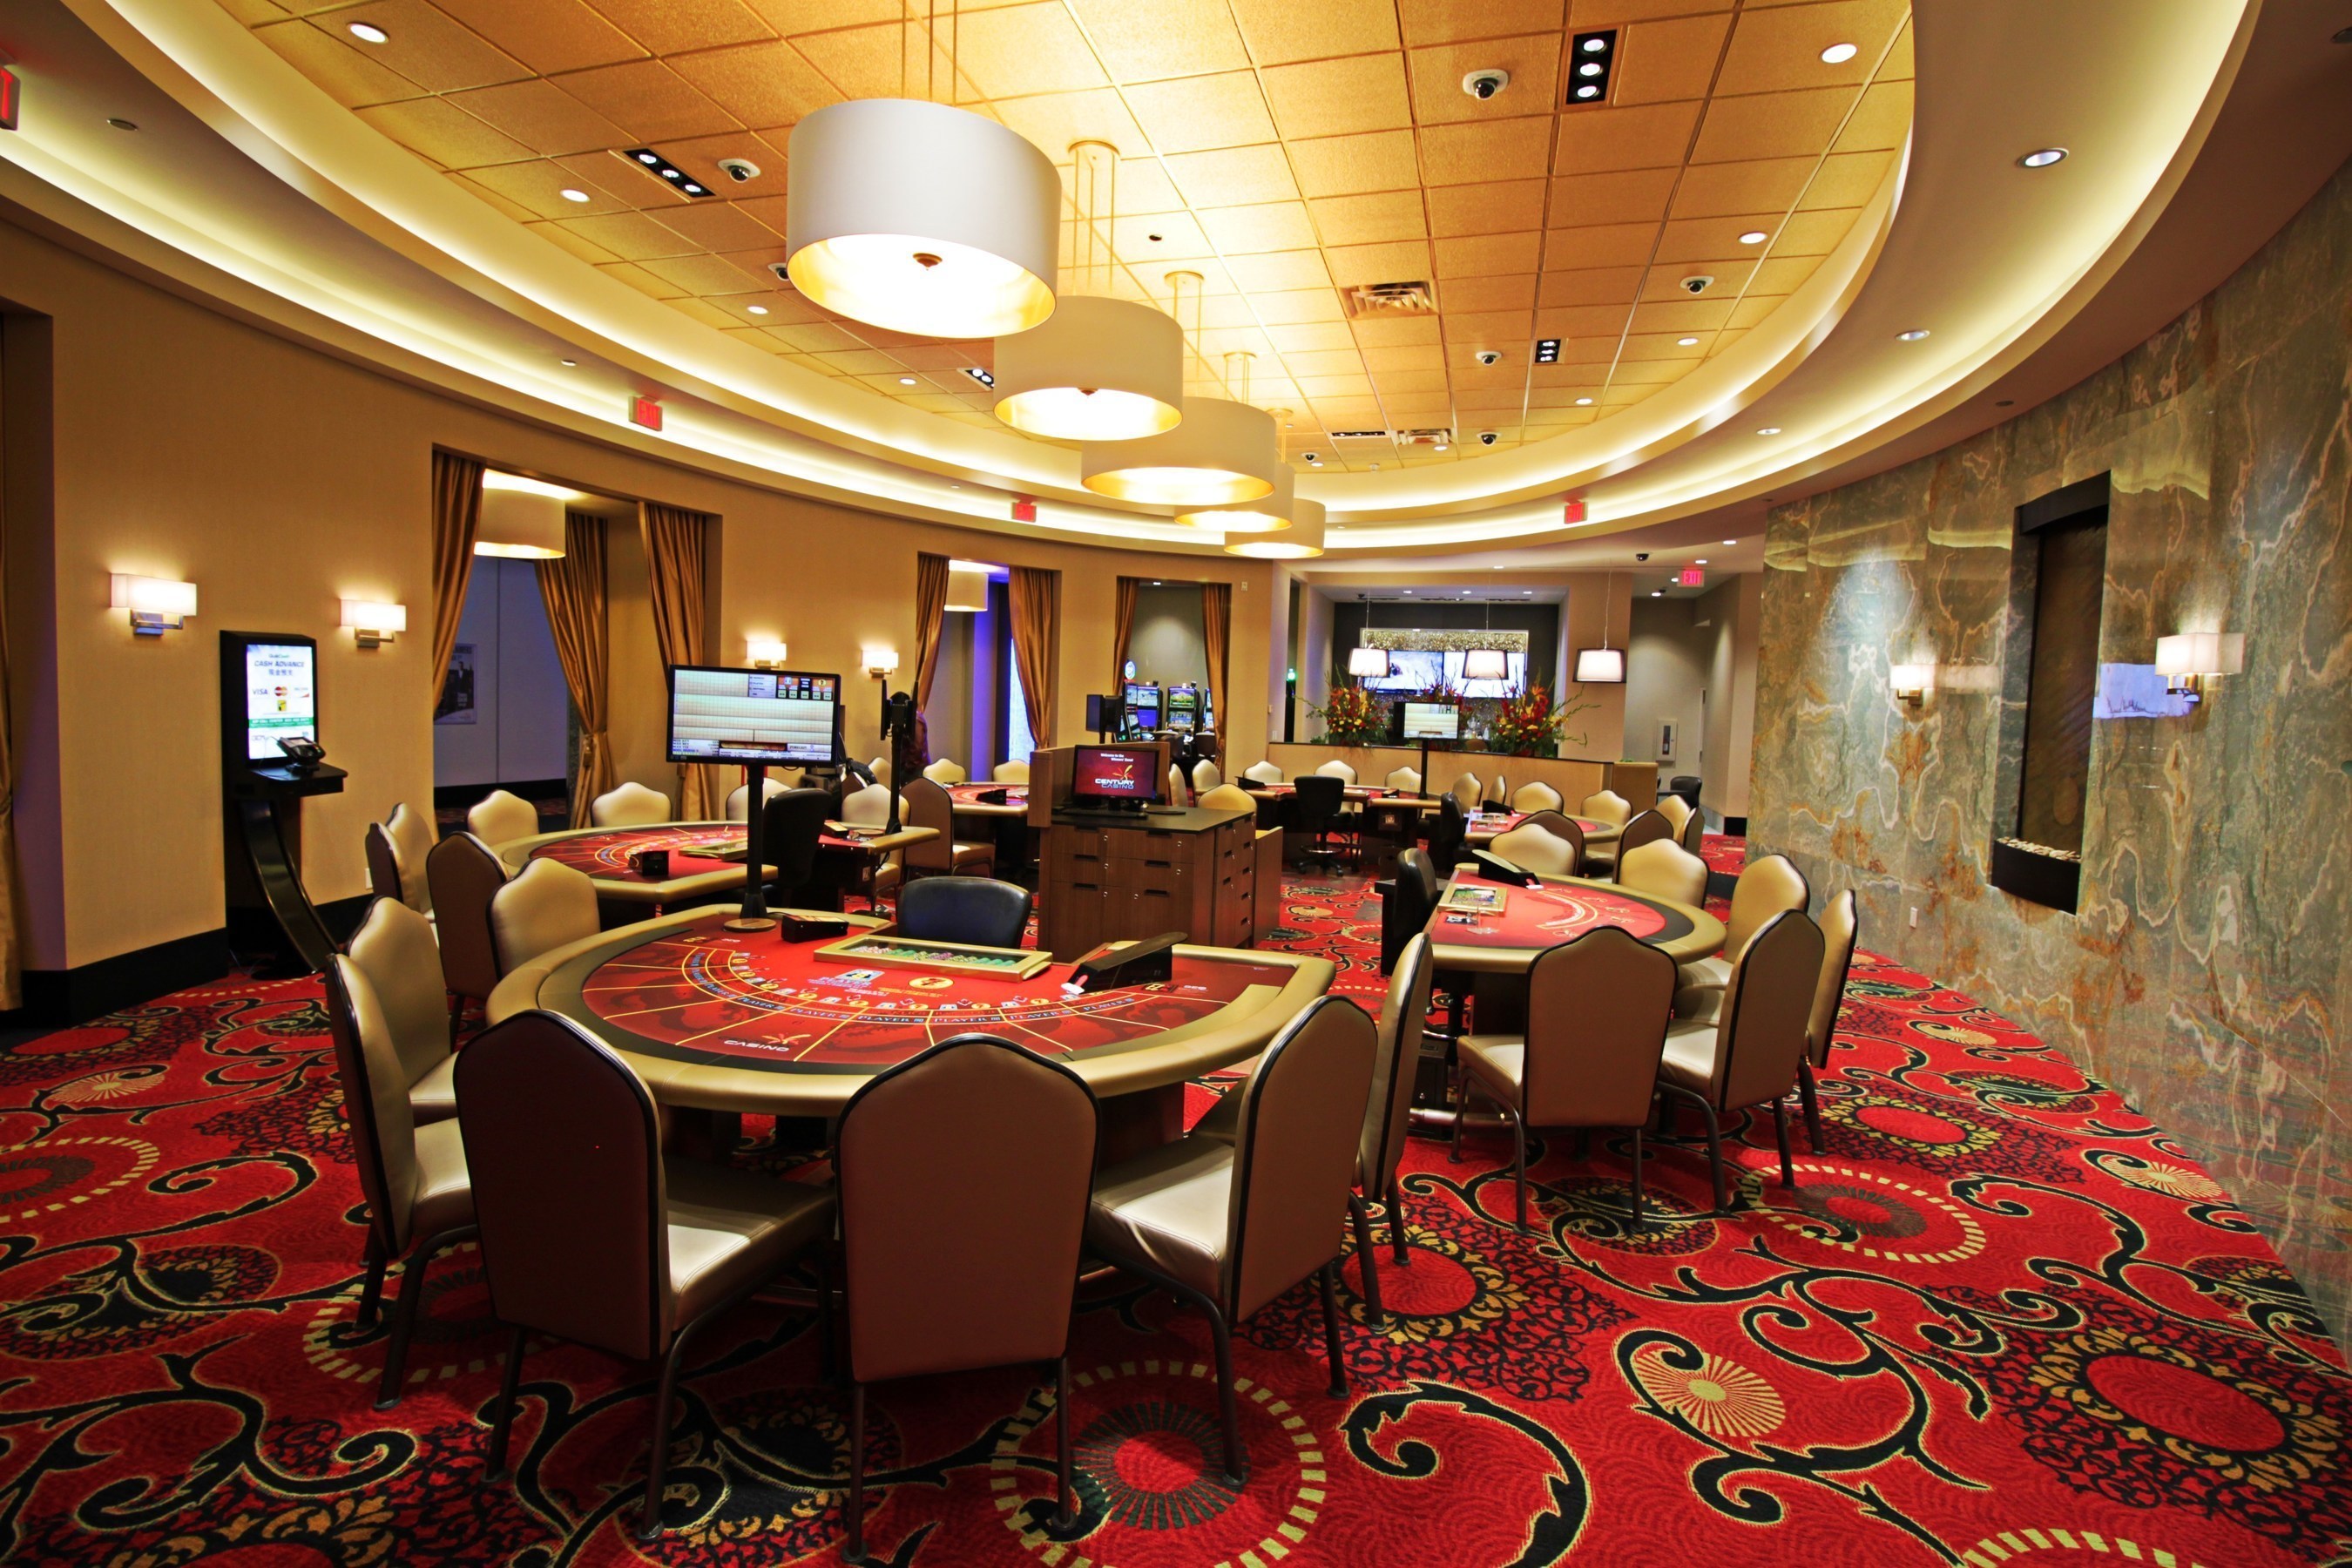 Century Casinos Announces Opening of New High Limit and VIP Gaming Rooms at Century Casino & Hotel Edmonton, Canada